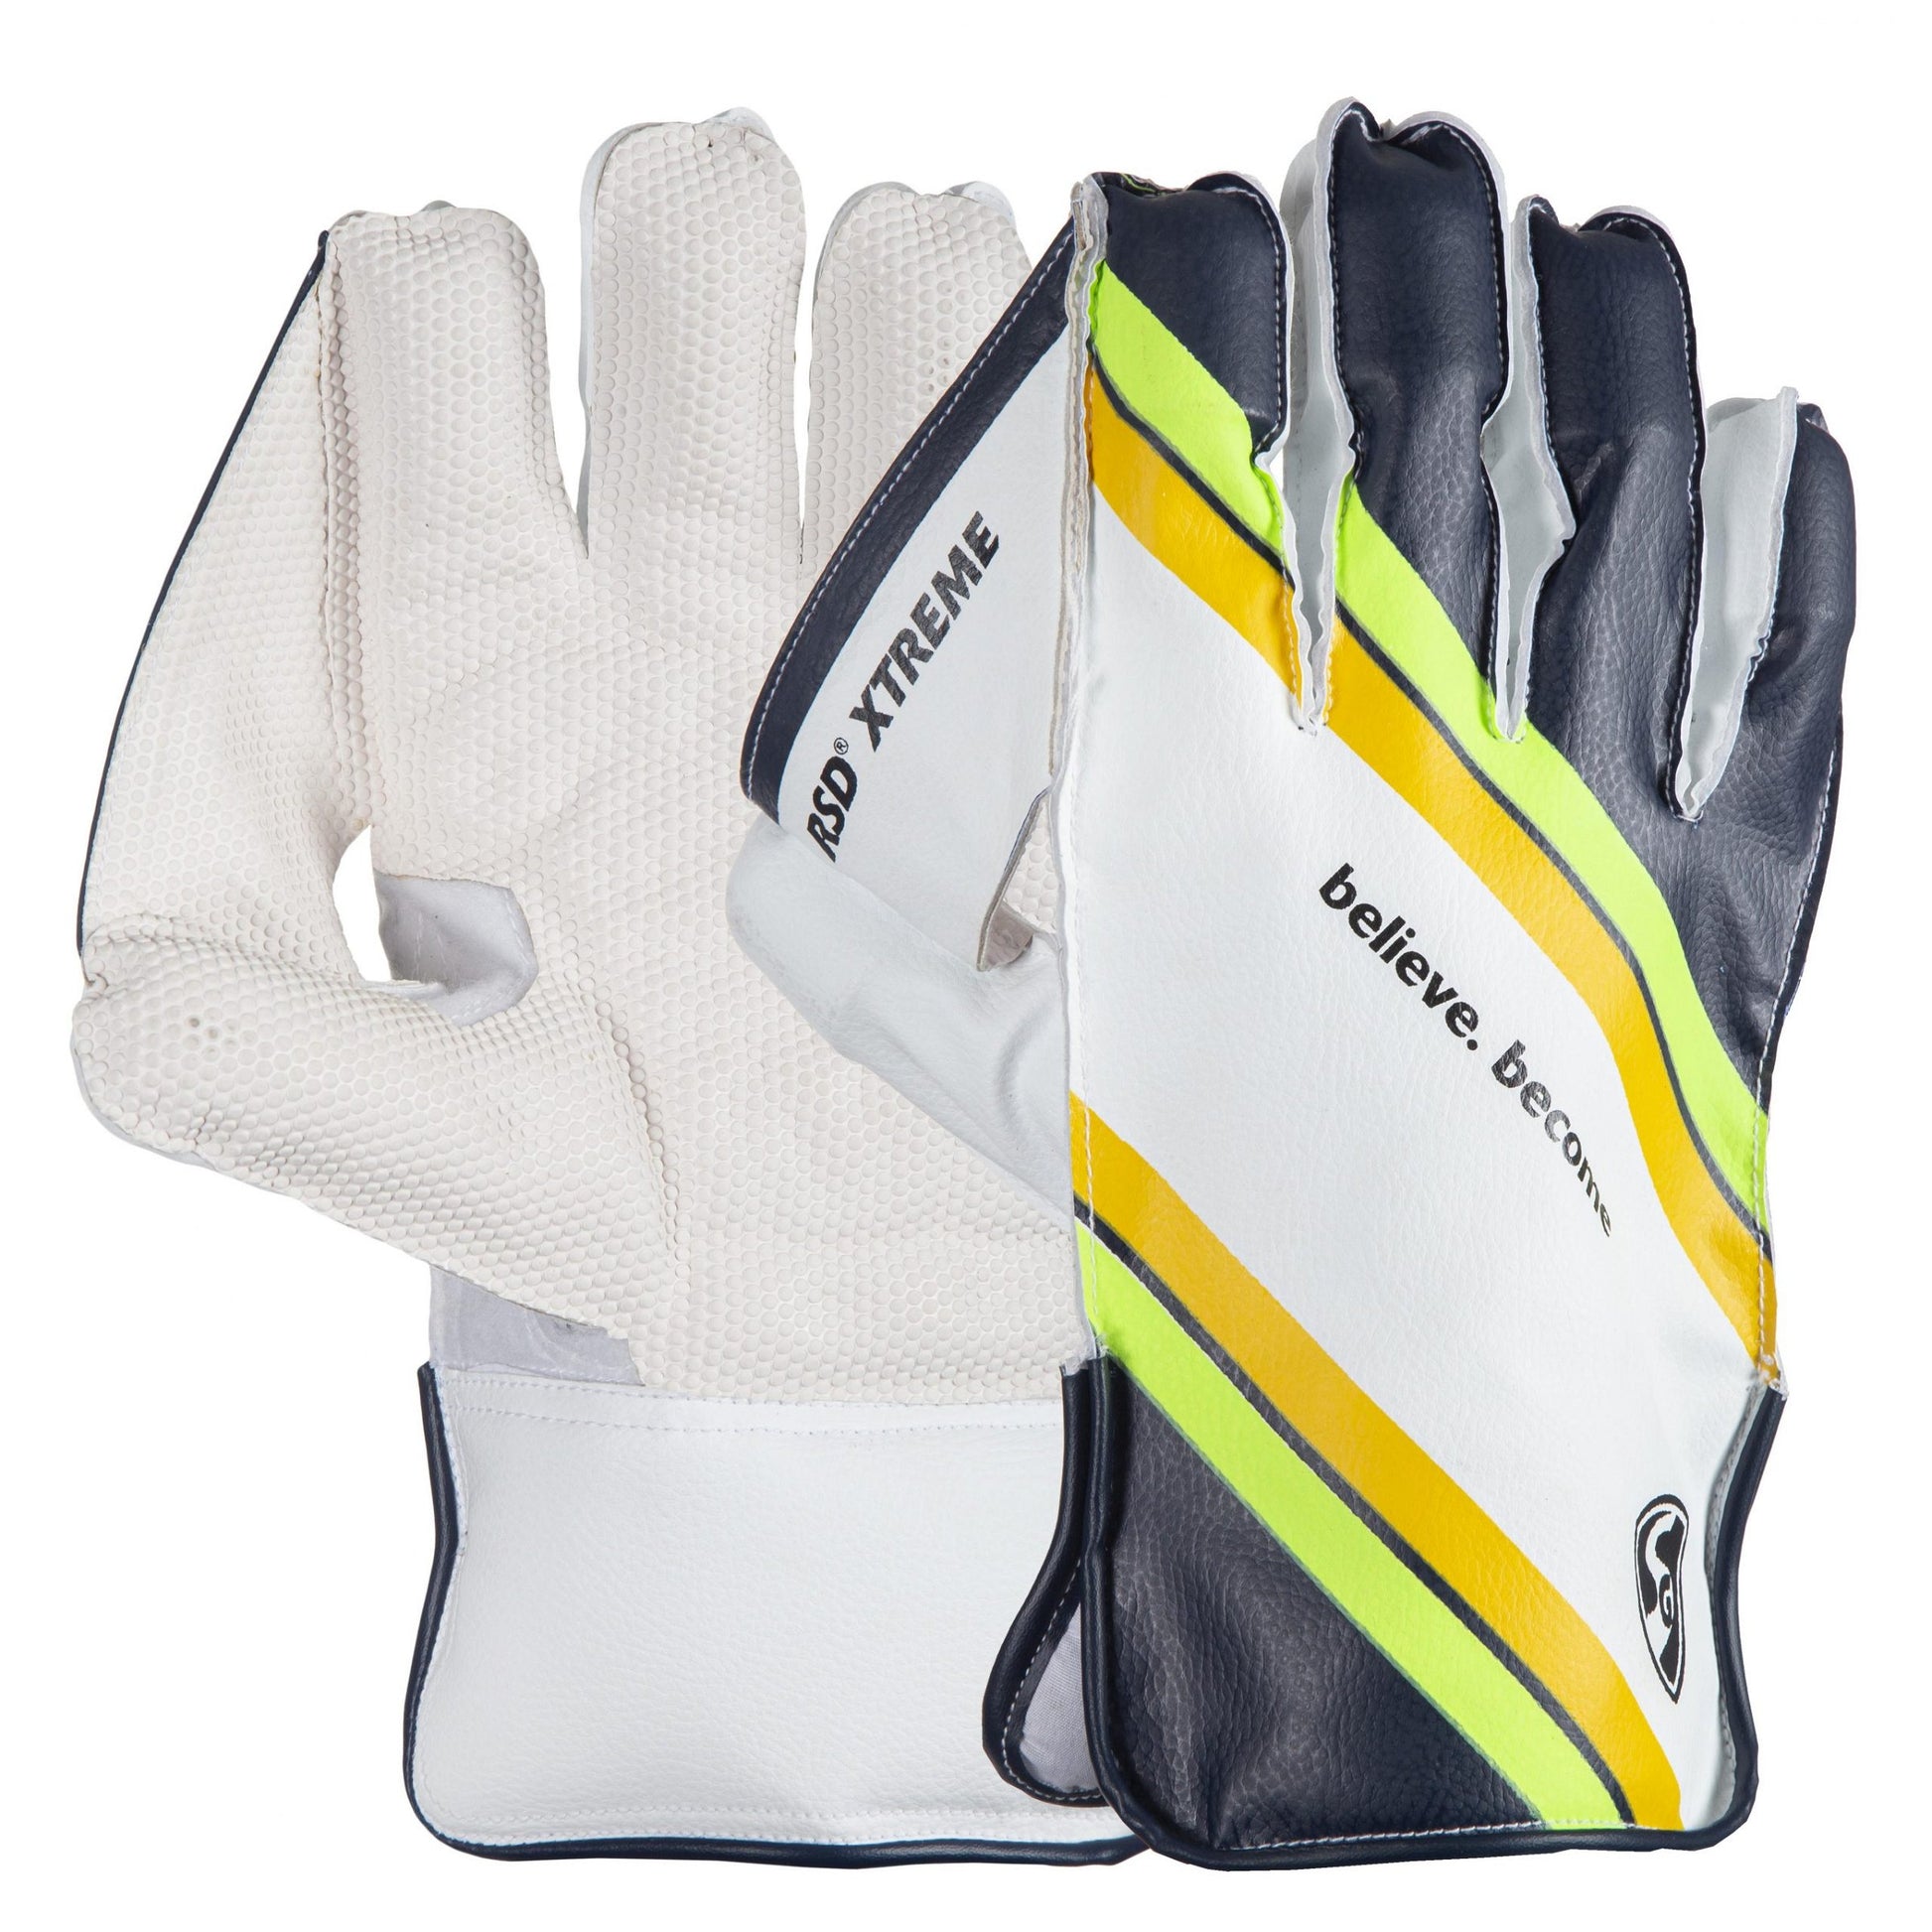 SG RSD Xtreme Wicket Keeping Gloves (Multi-Color) W.K. Gloves